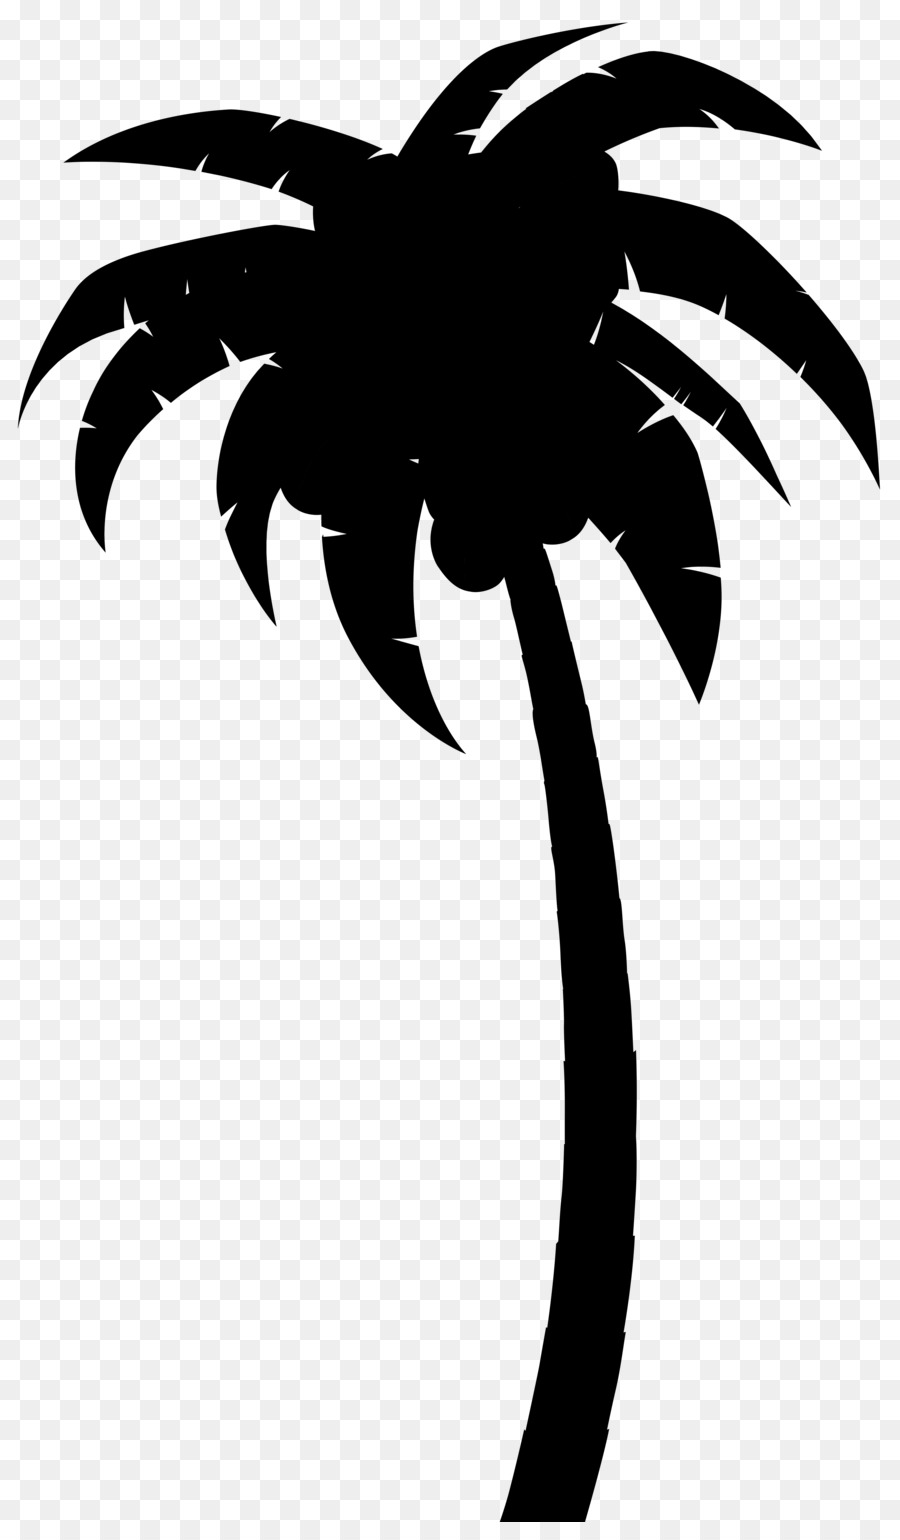 Palm trees Clip art Silhouette Leaf Flower -  png download - 4730*8000 - Free Transparent Palm Trees png Download.